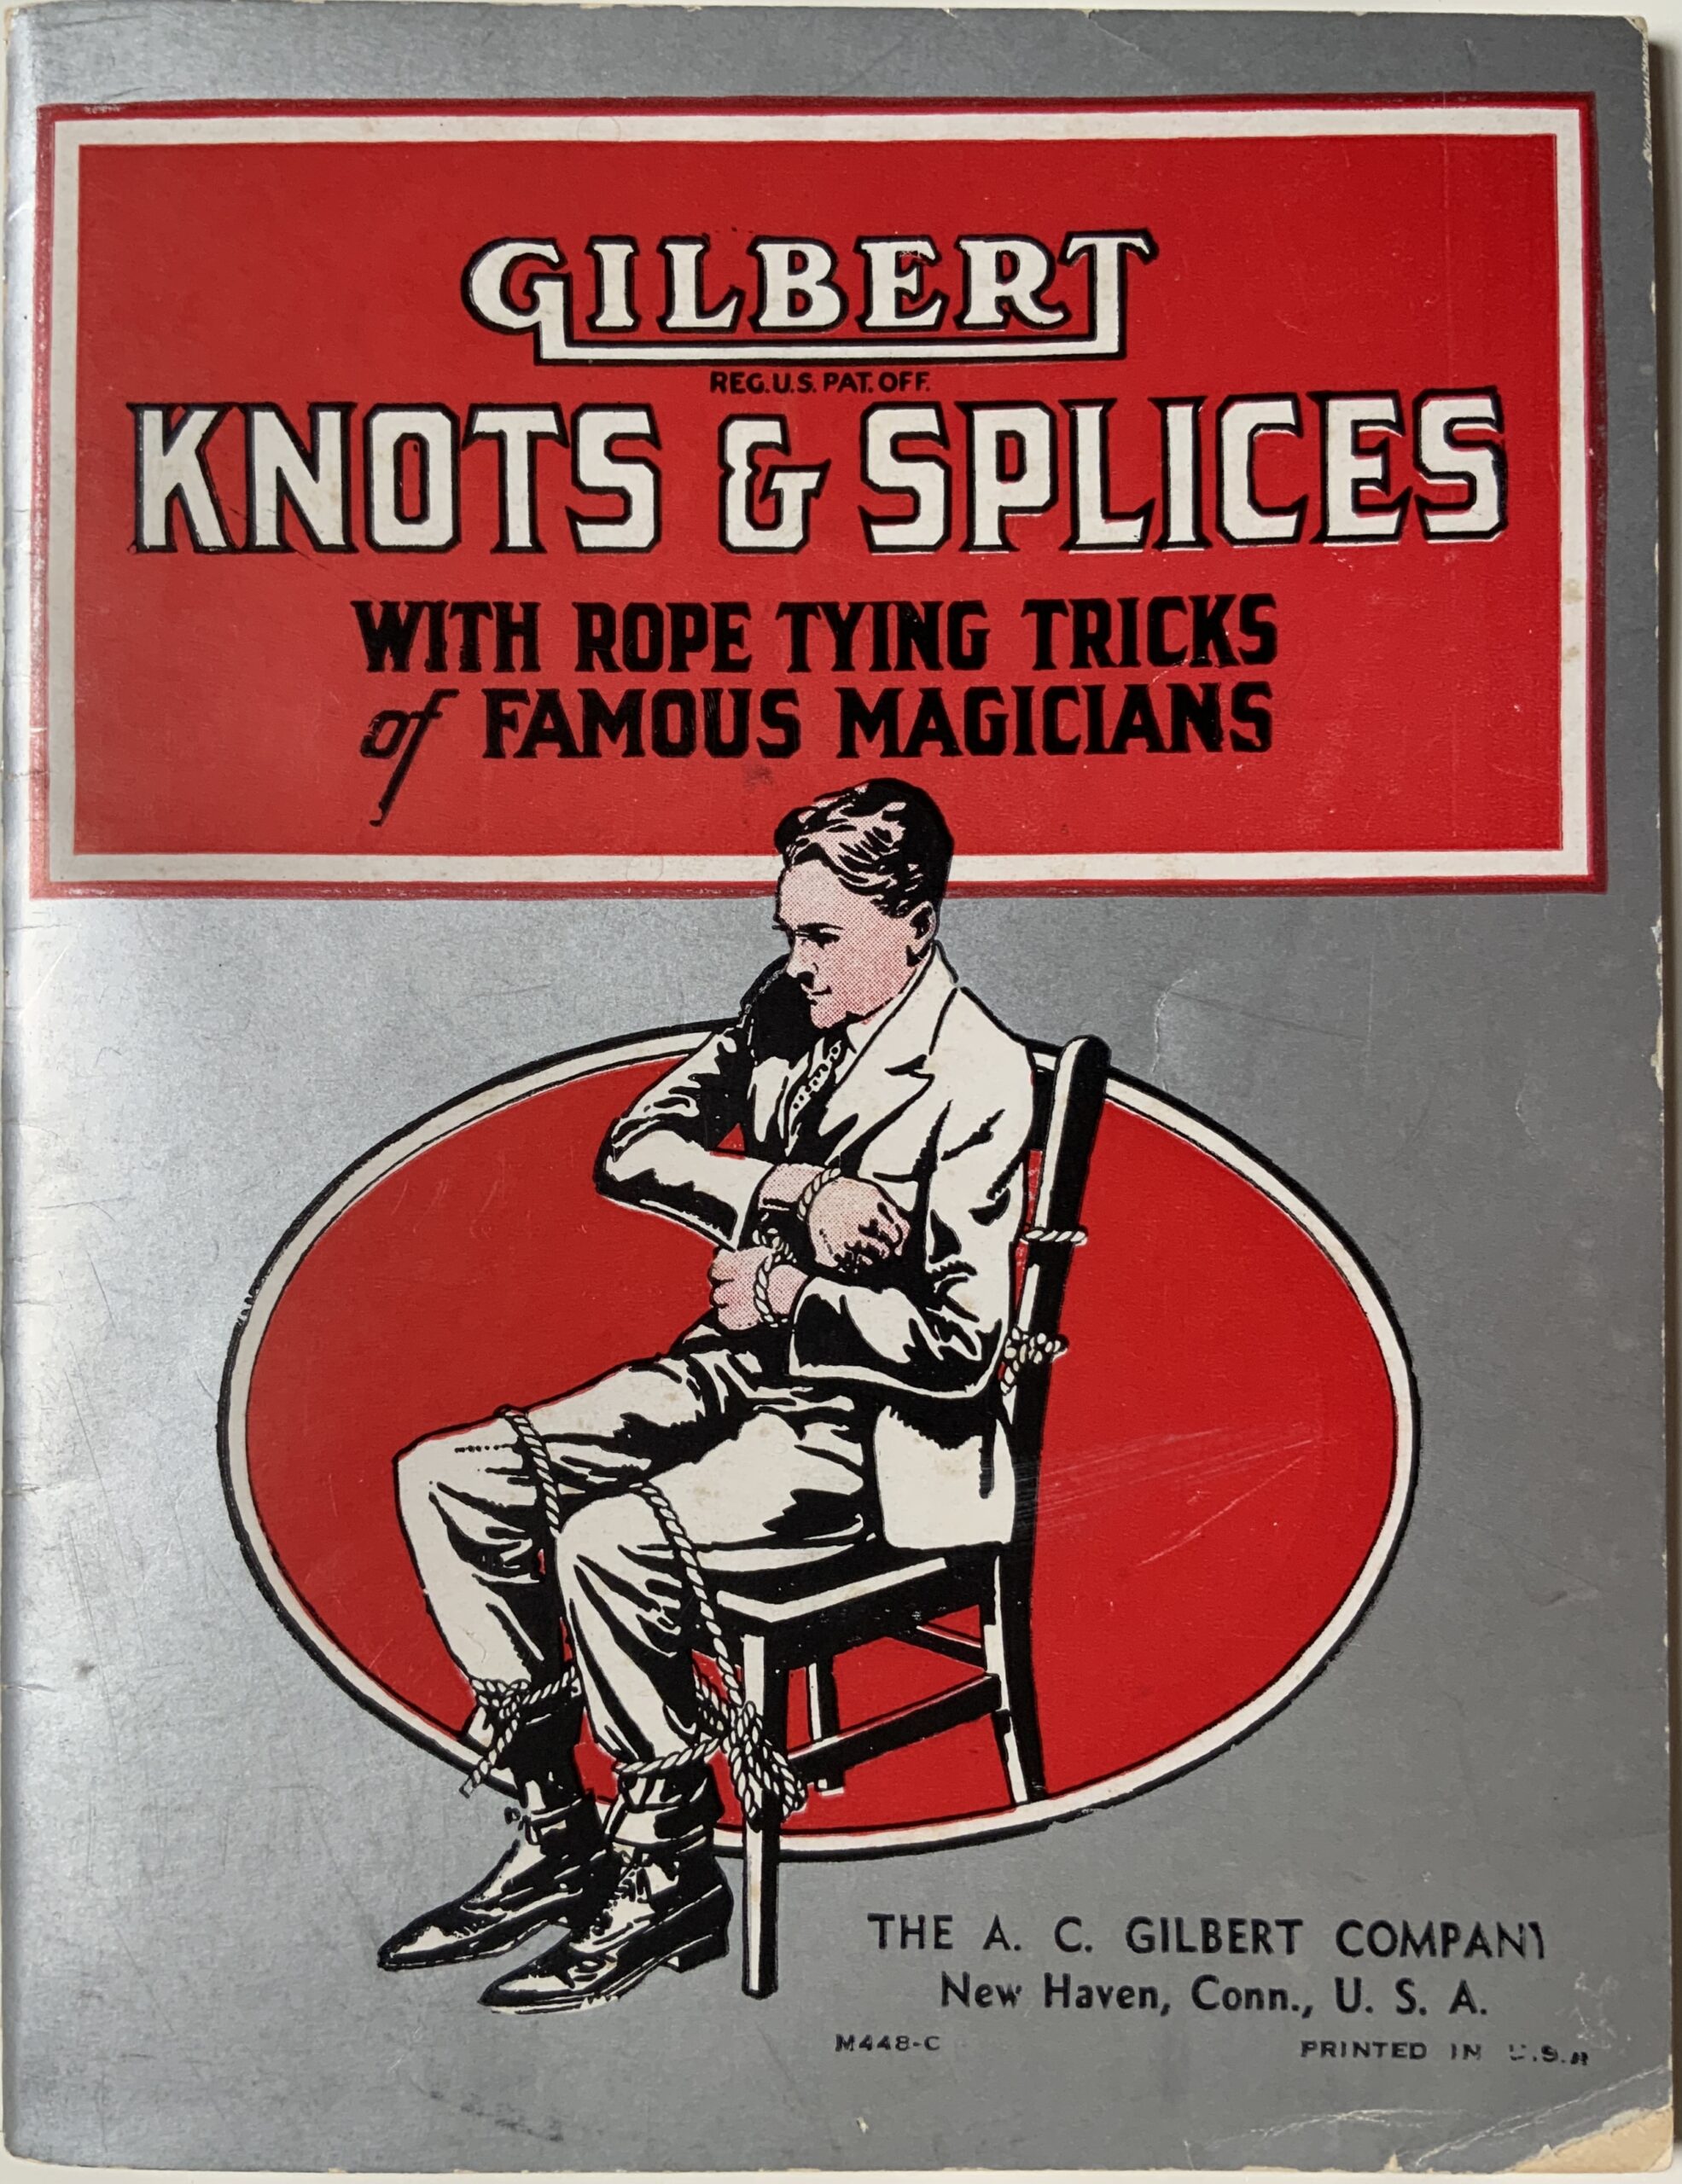 M98	GILBERT’S KNOTS AND SPLICES - WITH ROPE-TYING TRICKS OF FAMOUS MAGICIANS